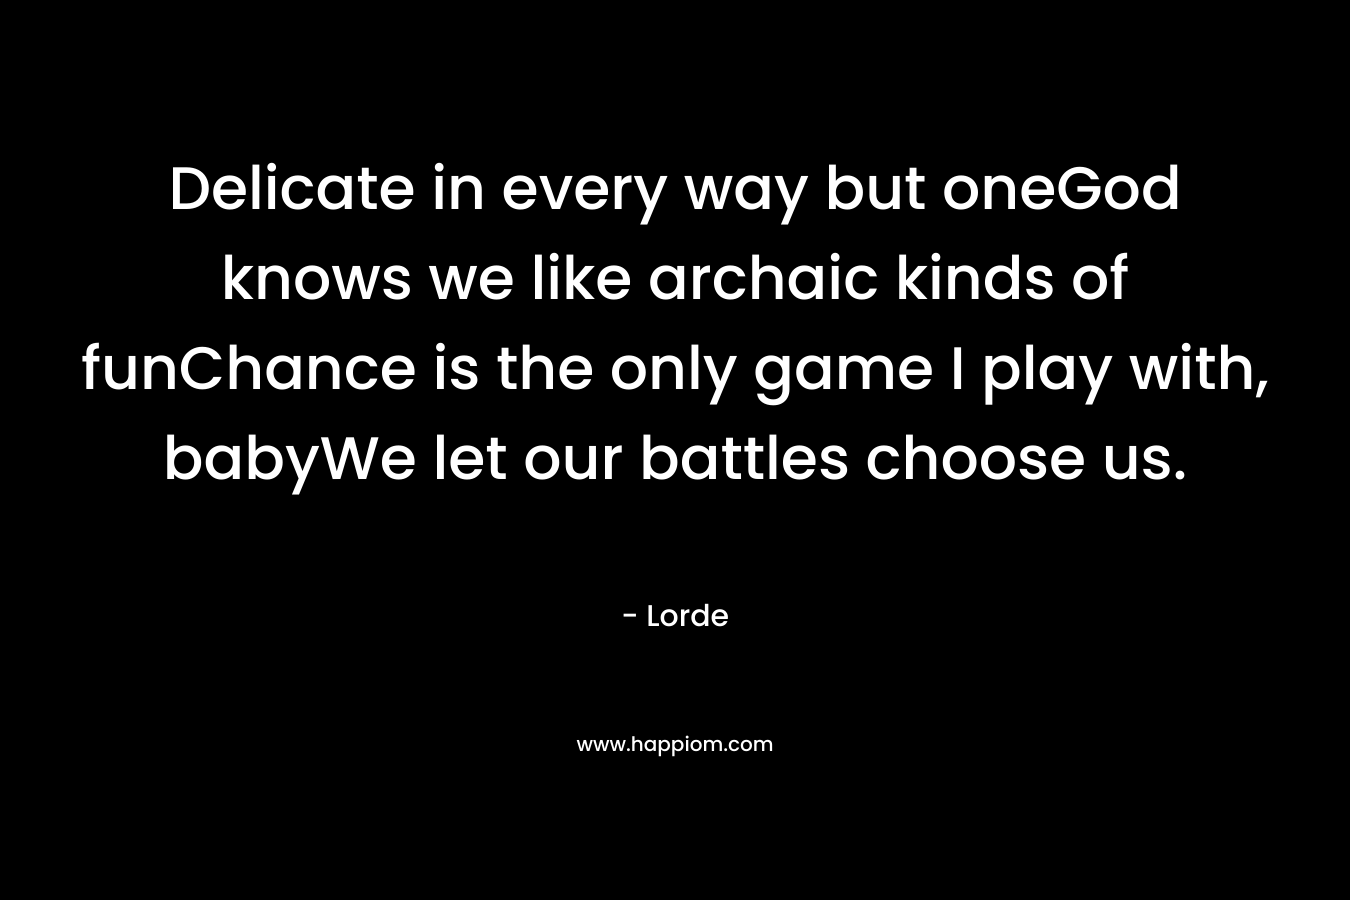 Delicate in every way but oneGod knows we like archaic kinds of funChance is the only game I play with, babyWe let our battles choose us.